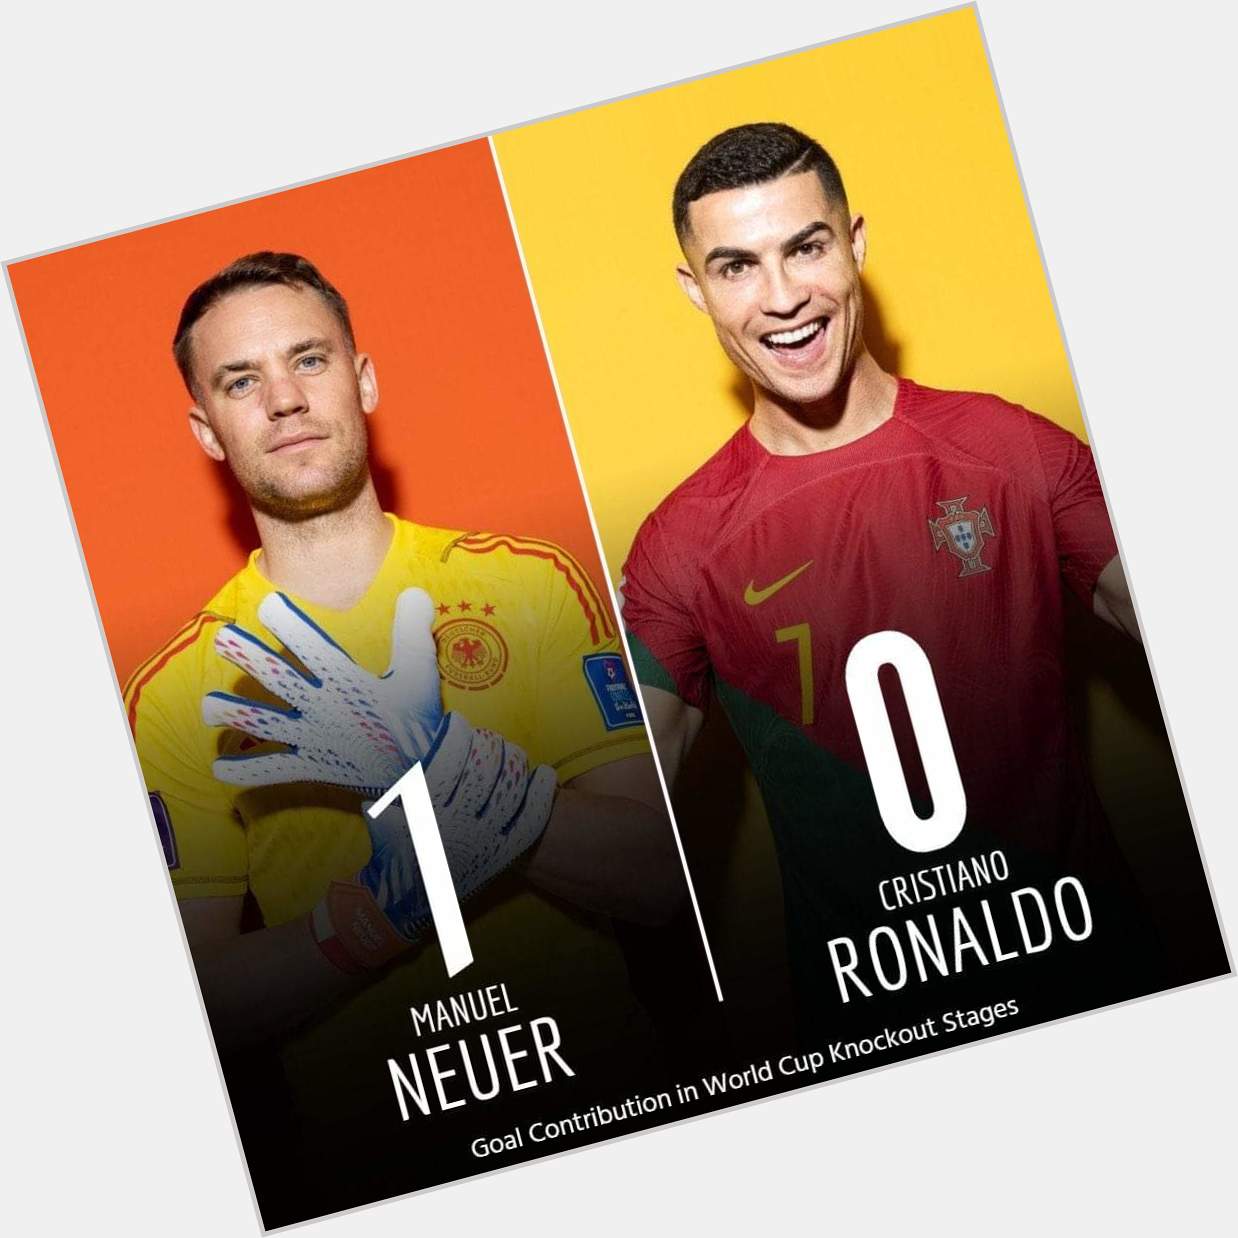 Happy Birthday, Manuel Neuer who has more world cup knock out stage goal than Ronaldo 